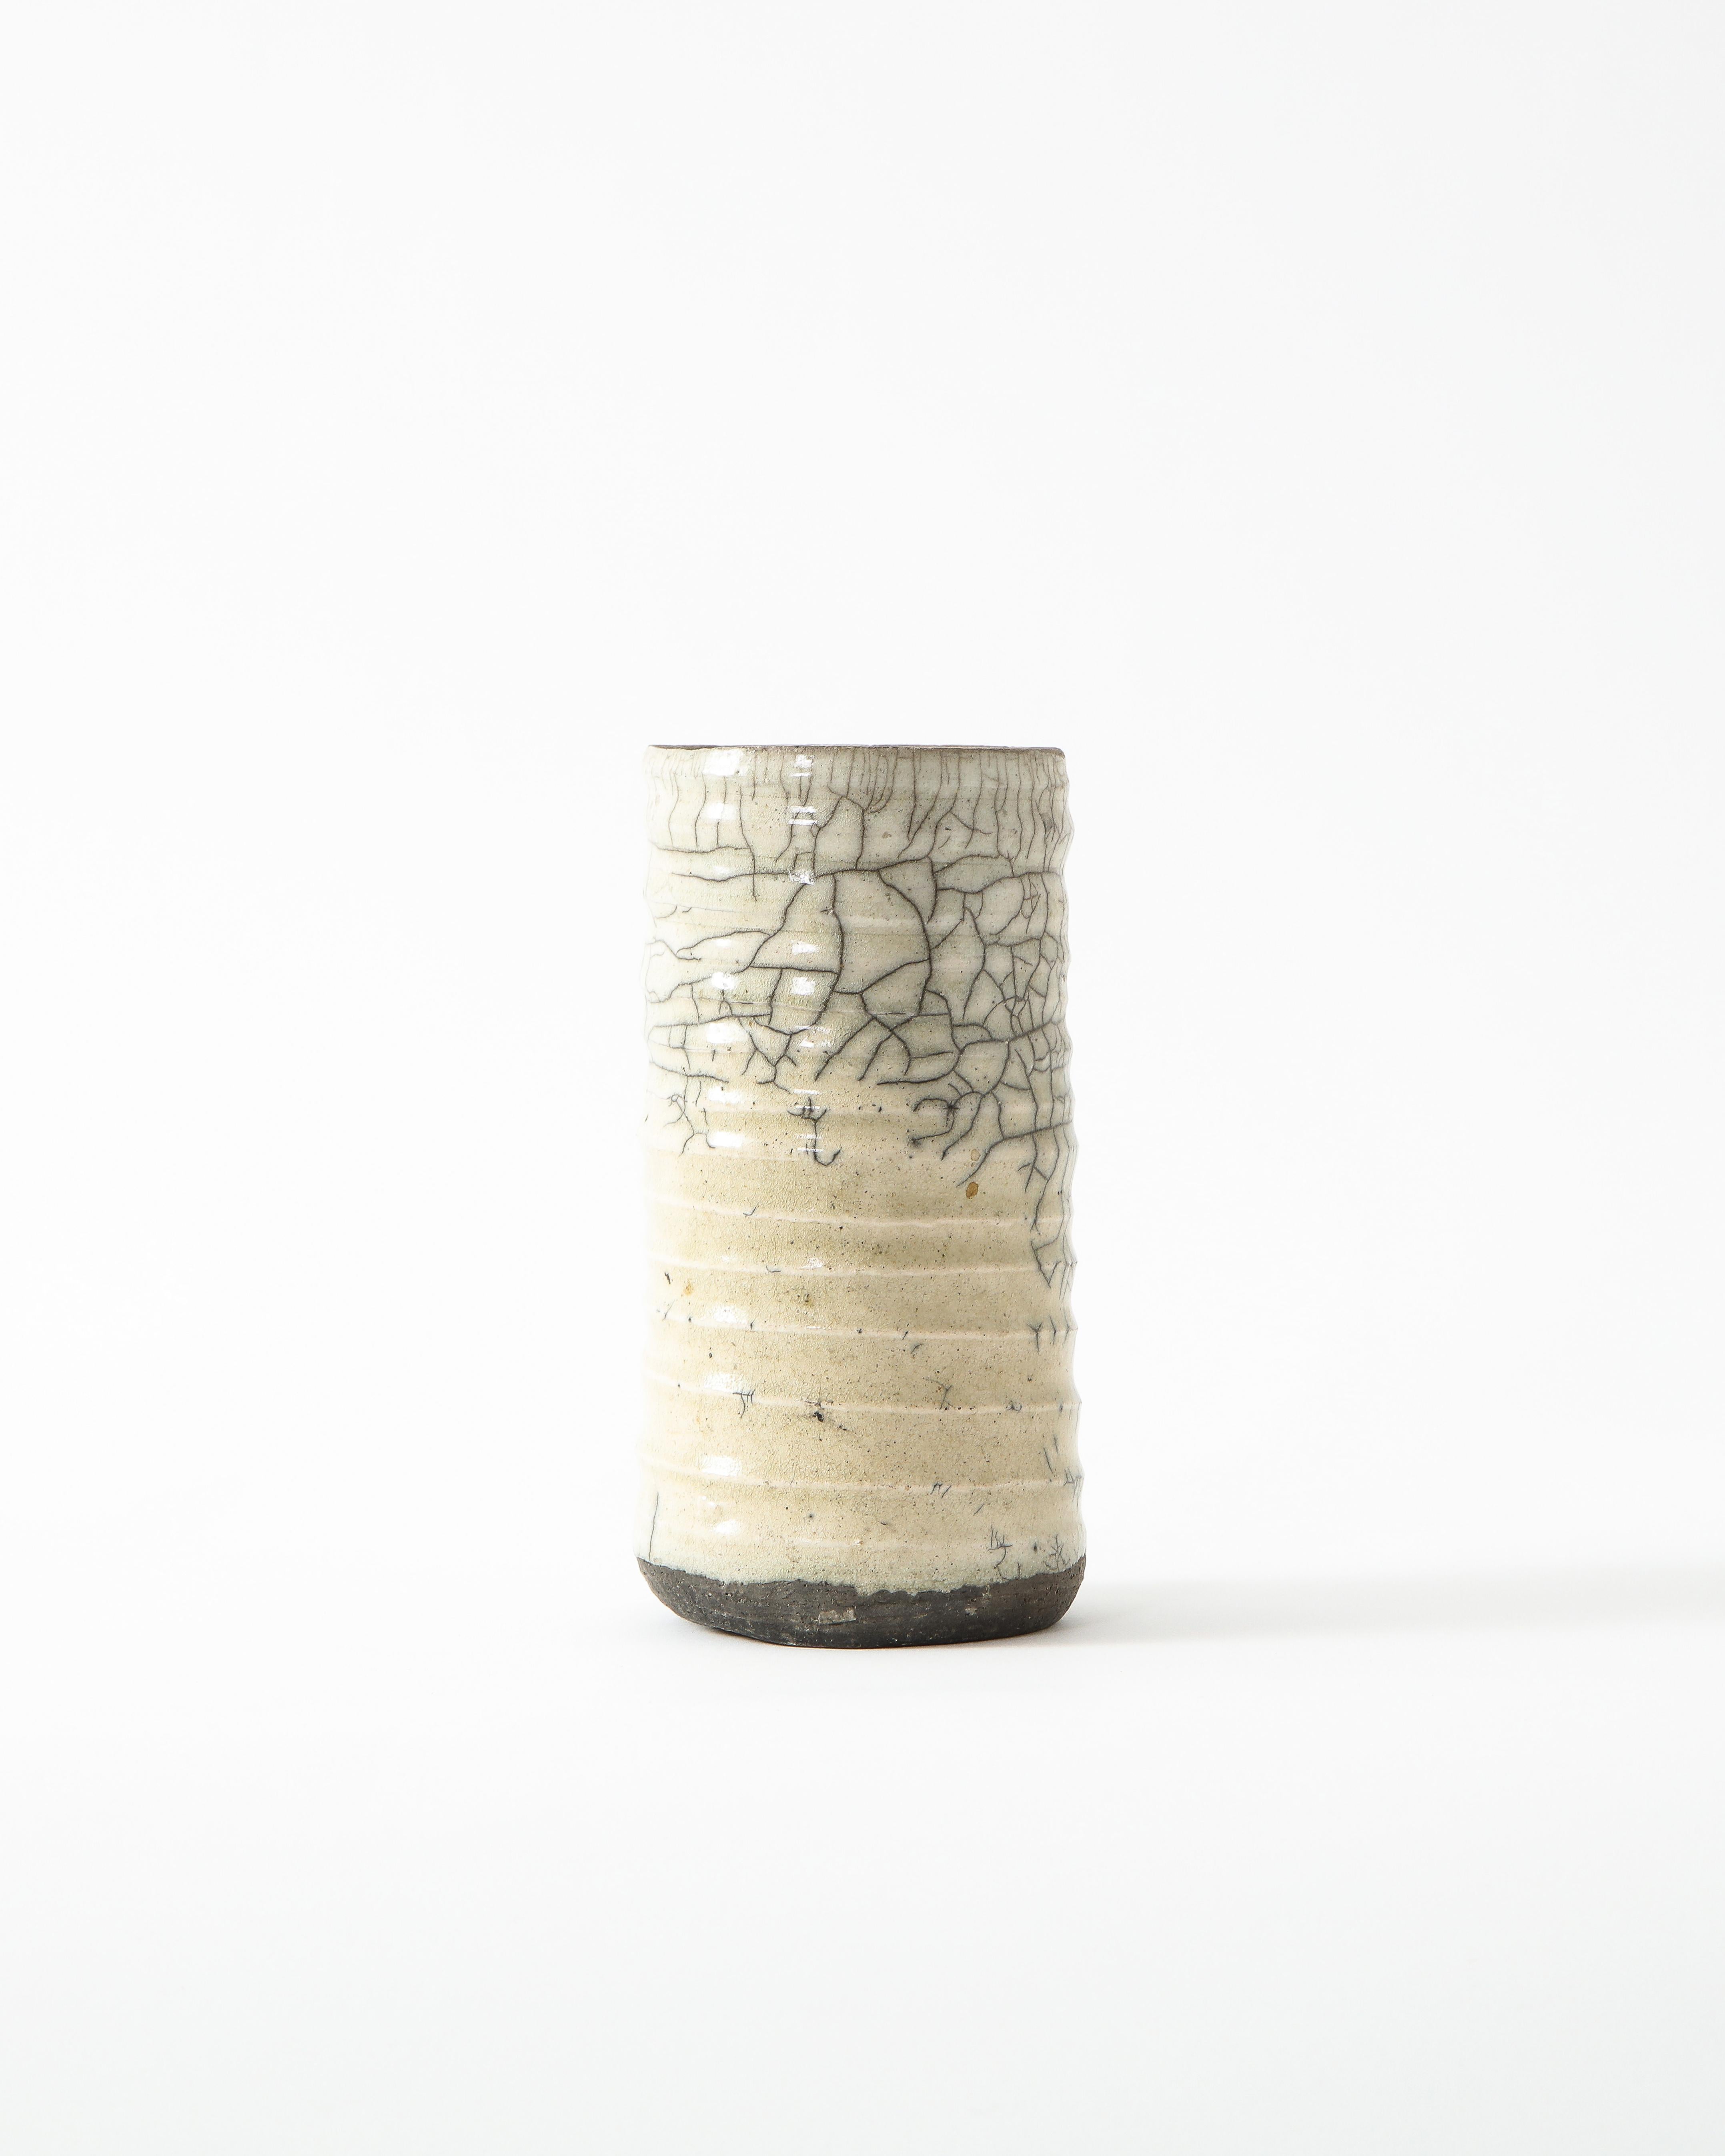 Asian Off-White Ceramic Vase with Intricate Crackling